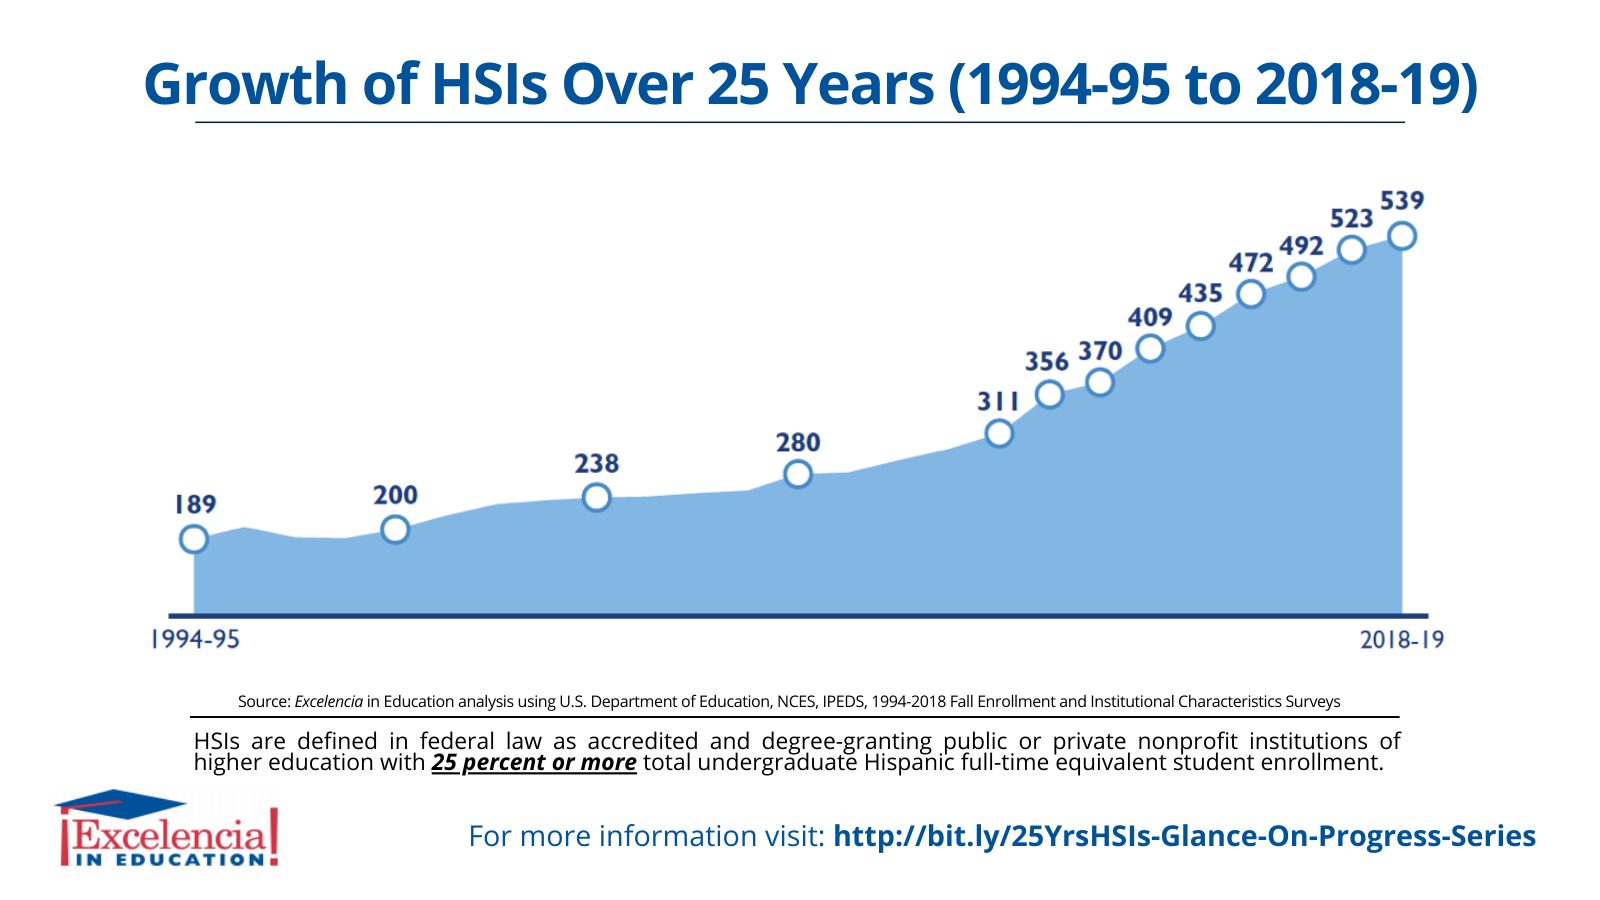 Infographic-Growth of HSIs Over 25 Years (1994-95 to 2018-19)